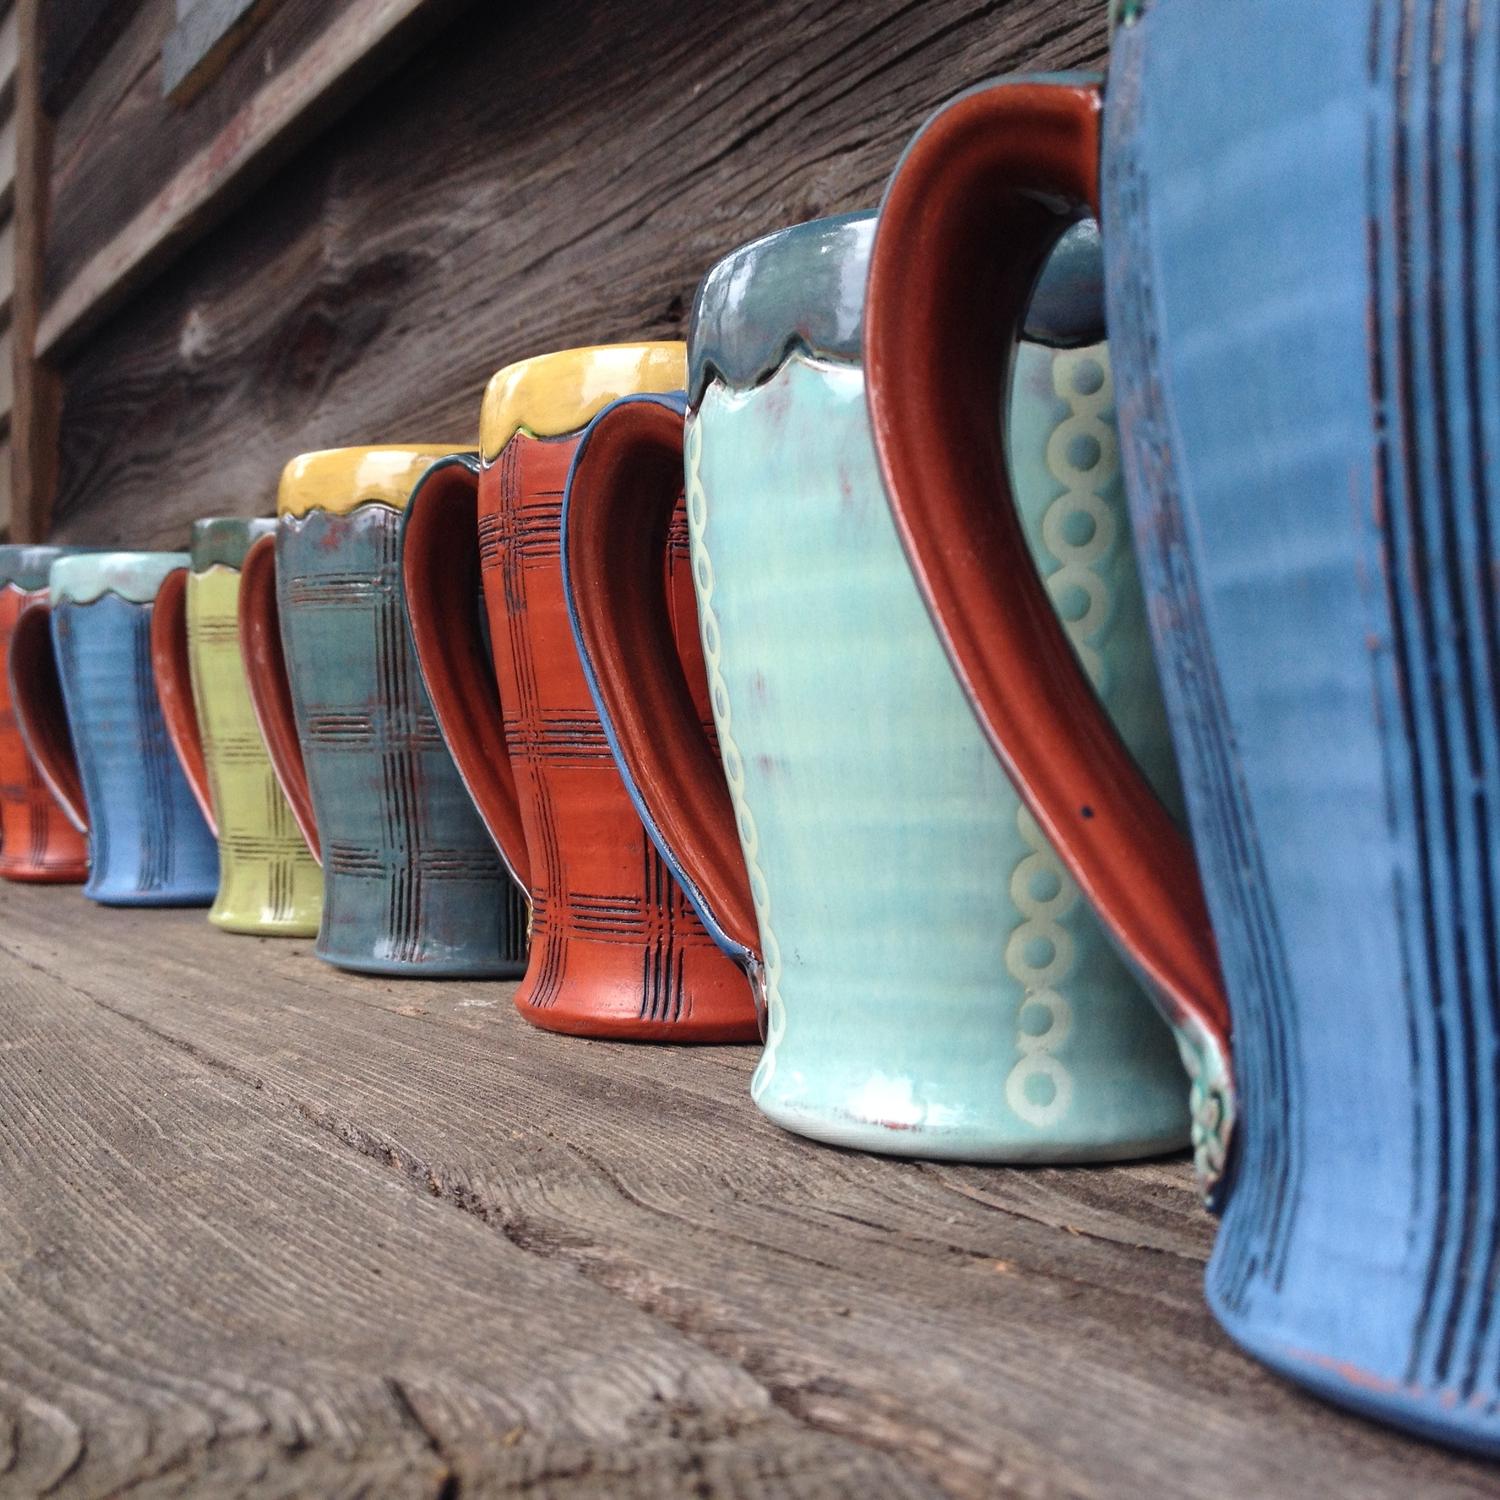 Row of vibrant colored ceramic coffee mugs created by artist Amy Sanders.